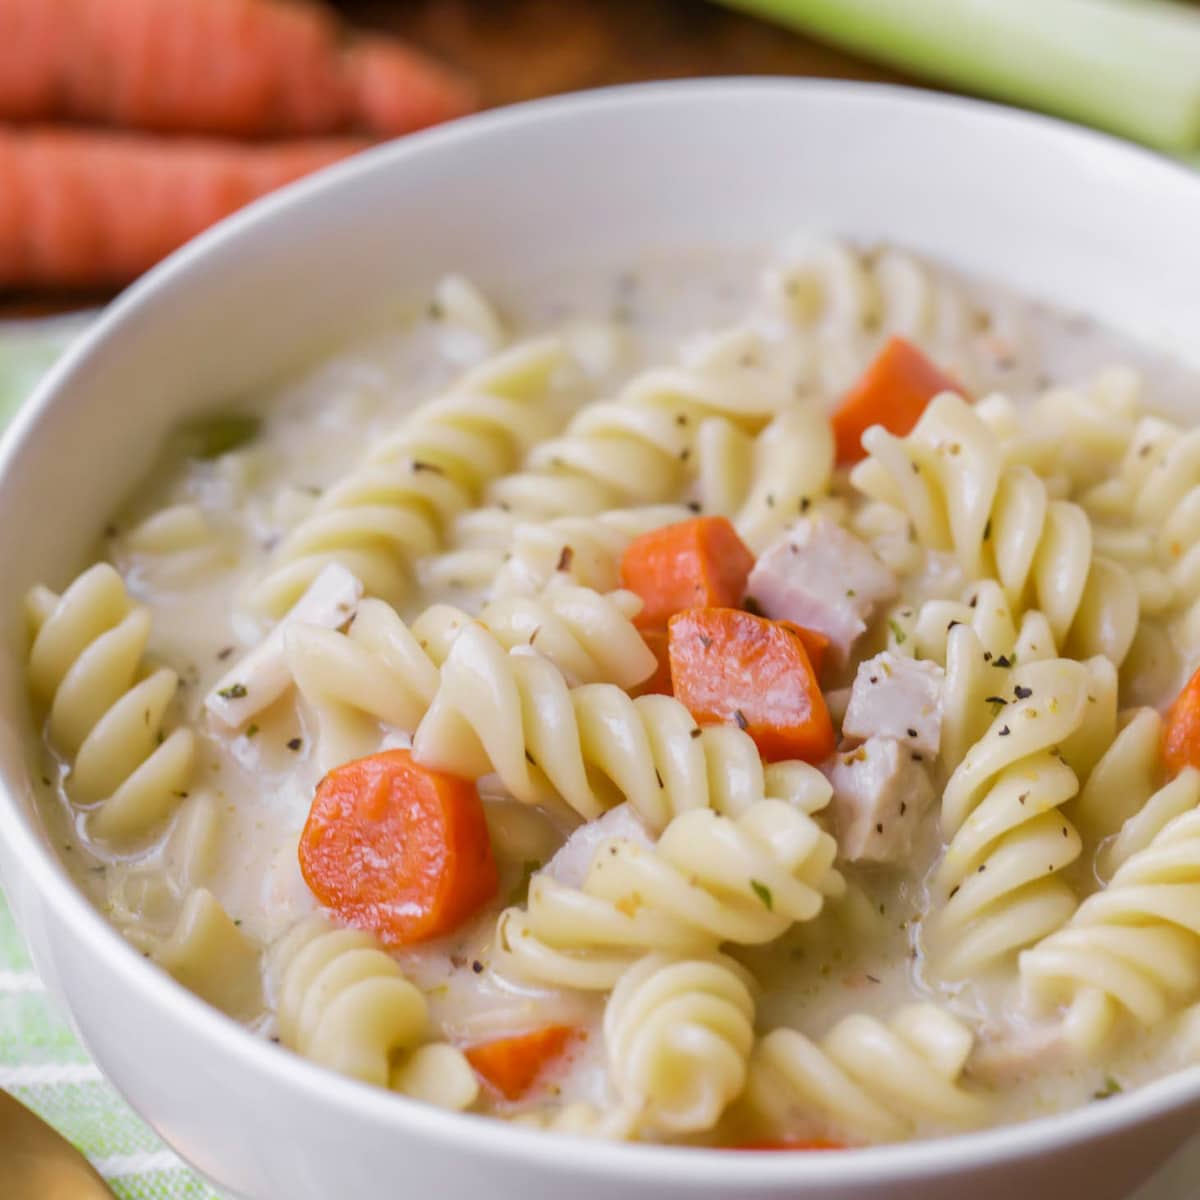 Leftover turkey recipes - a bowl filled with turkey noodle soup.